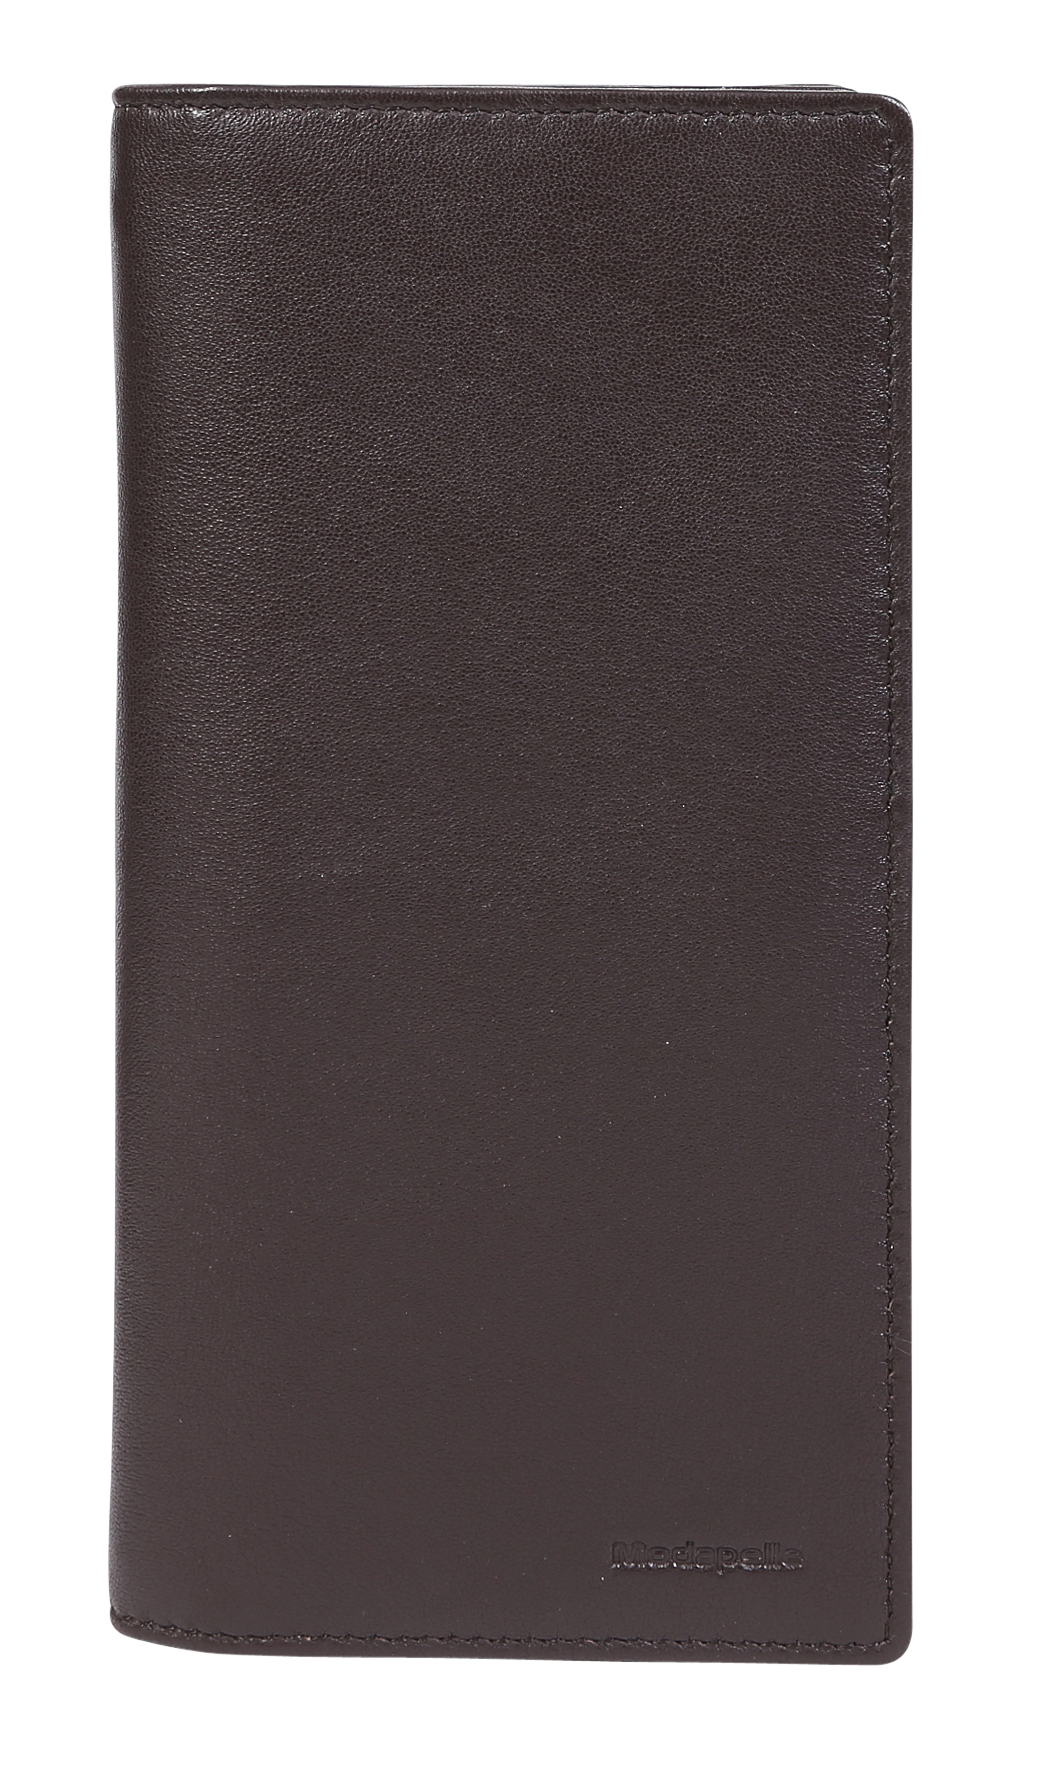 Nappa Leather Mens Wallet 5022 Brown - Modapelle Direct